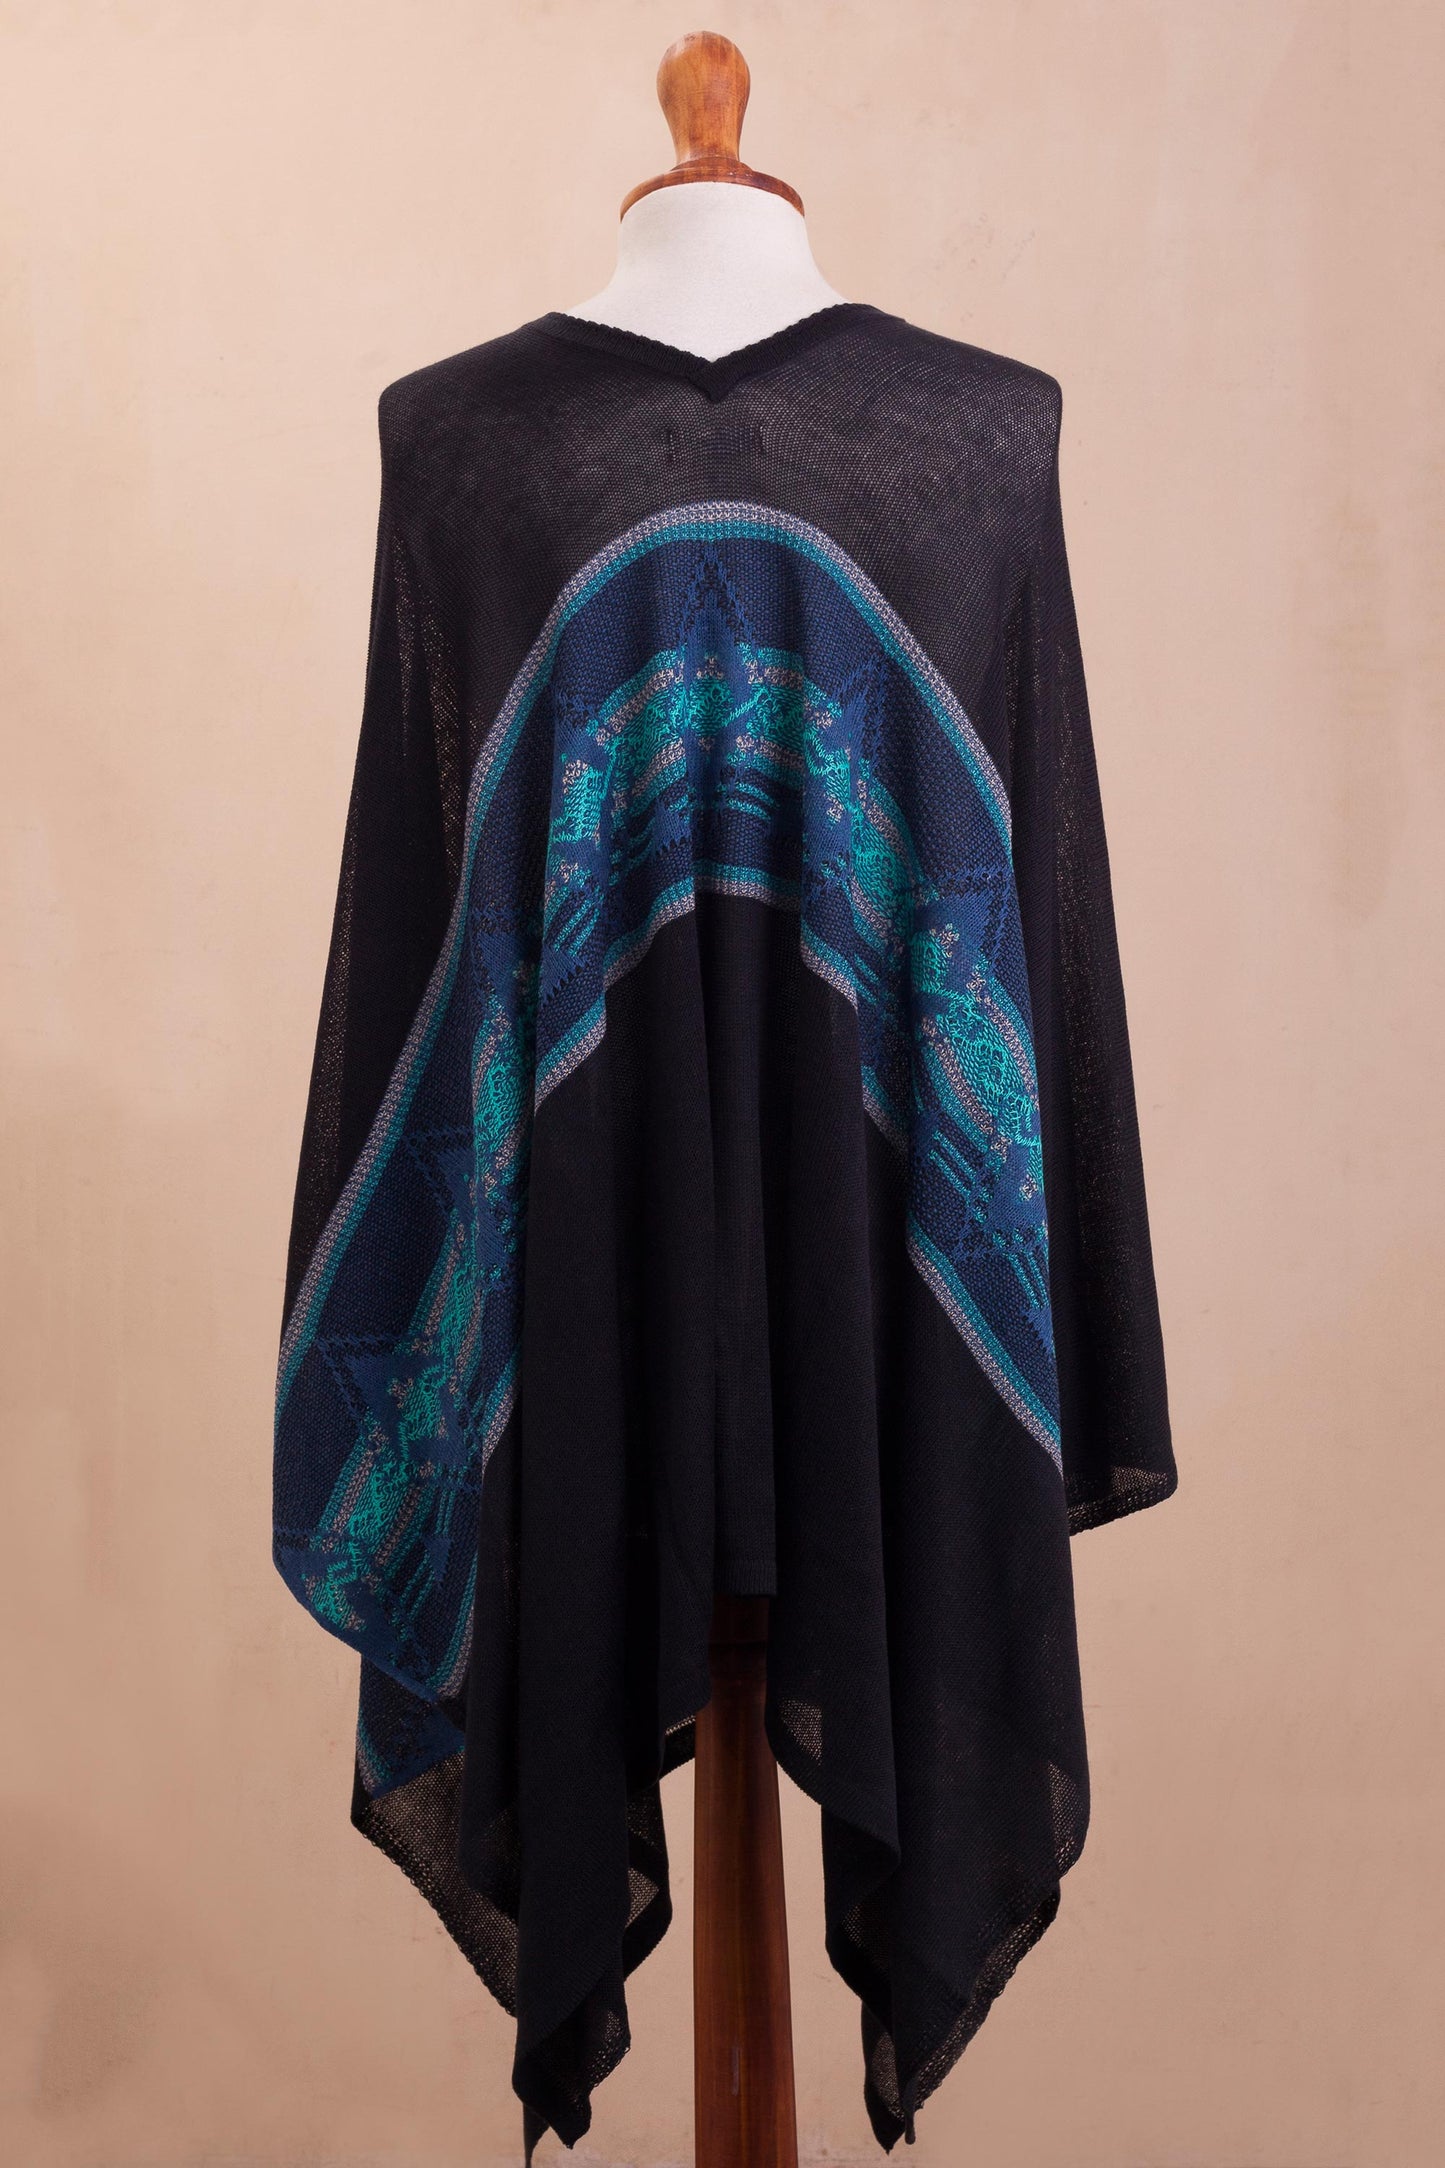 Seasonal Escape Artisan Crafted Cotton Blend Poncho in Black and Blue